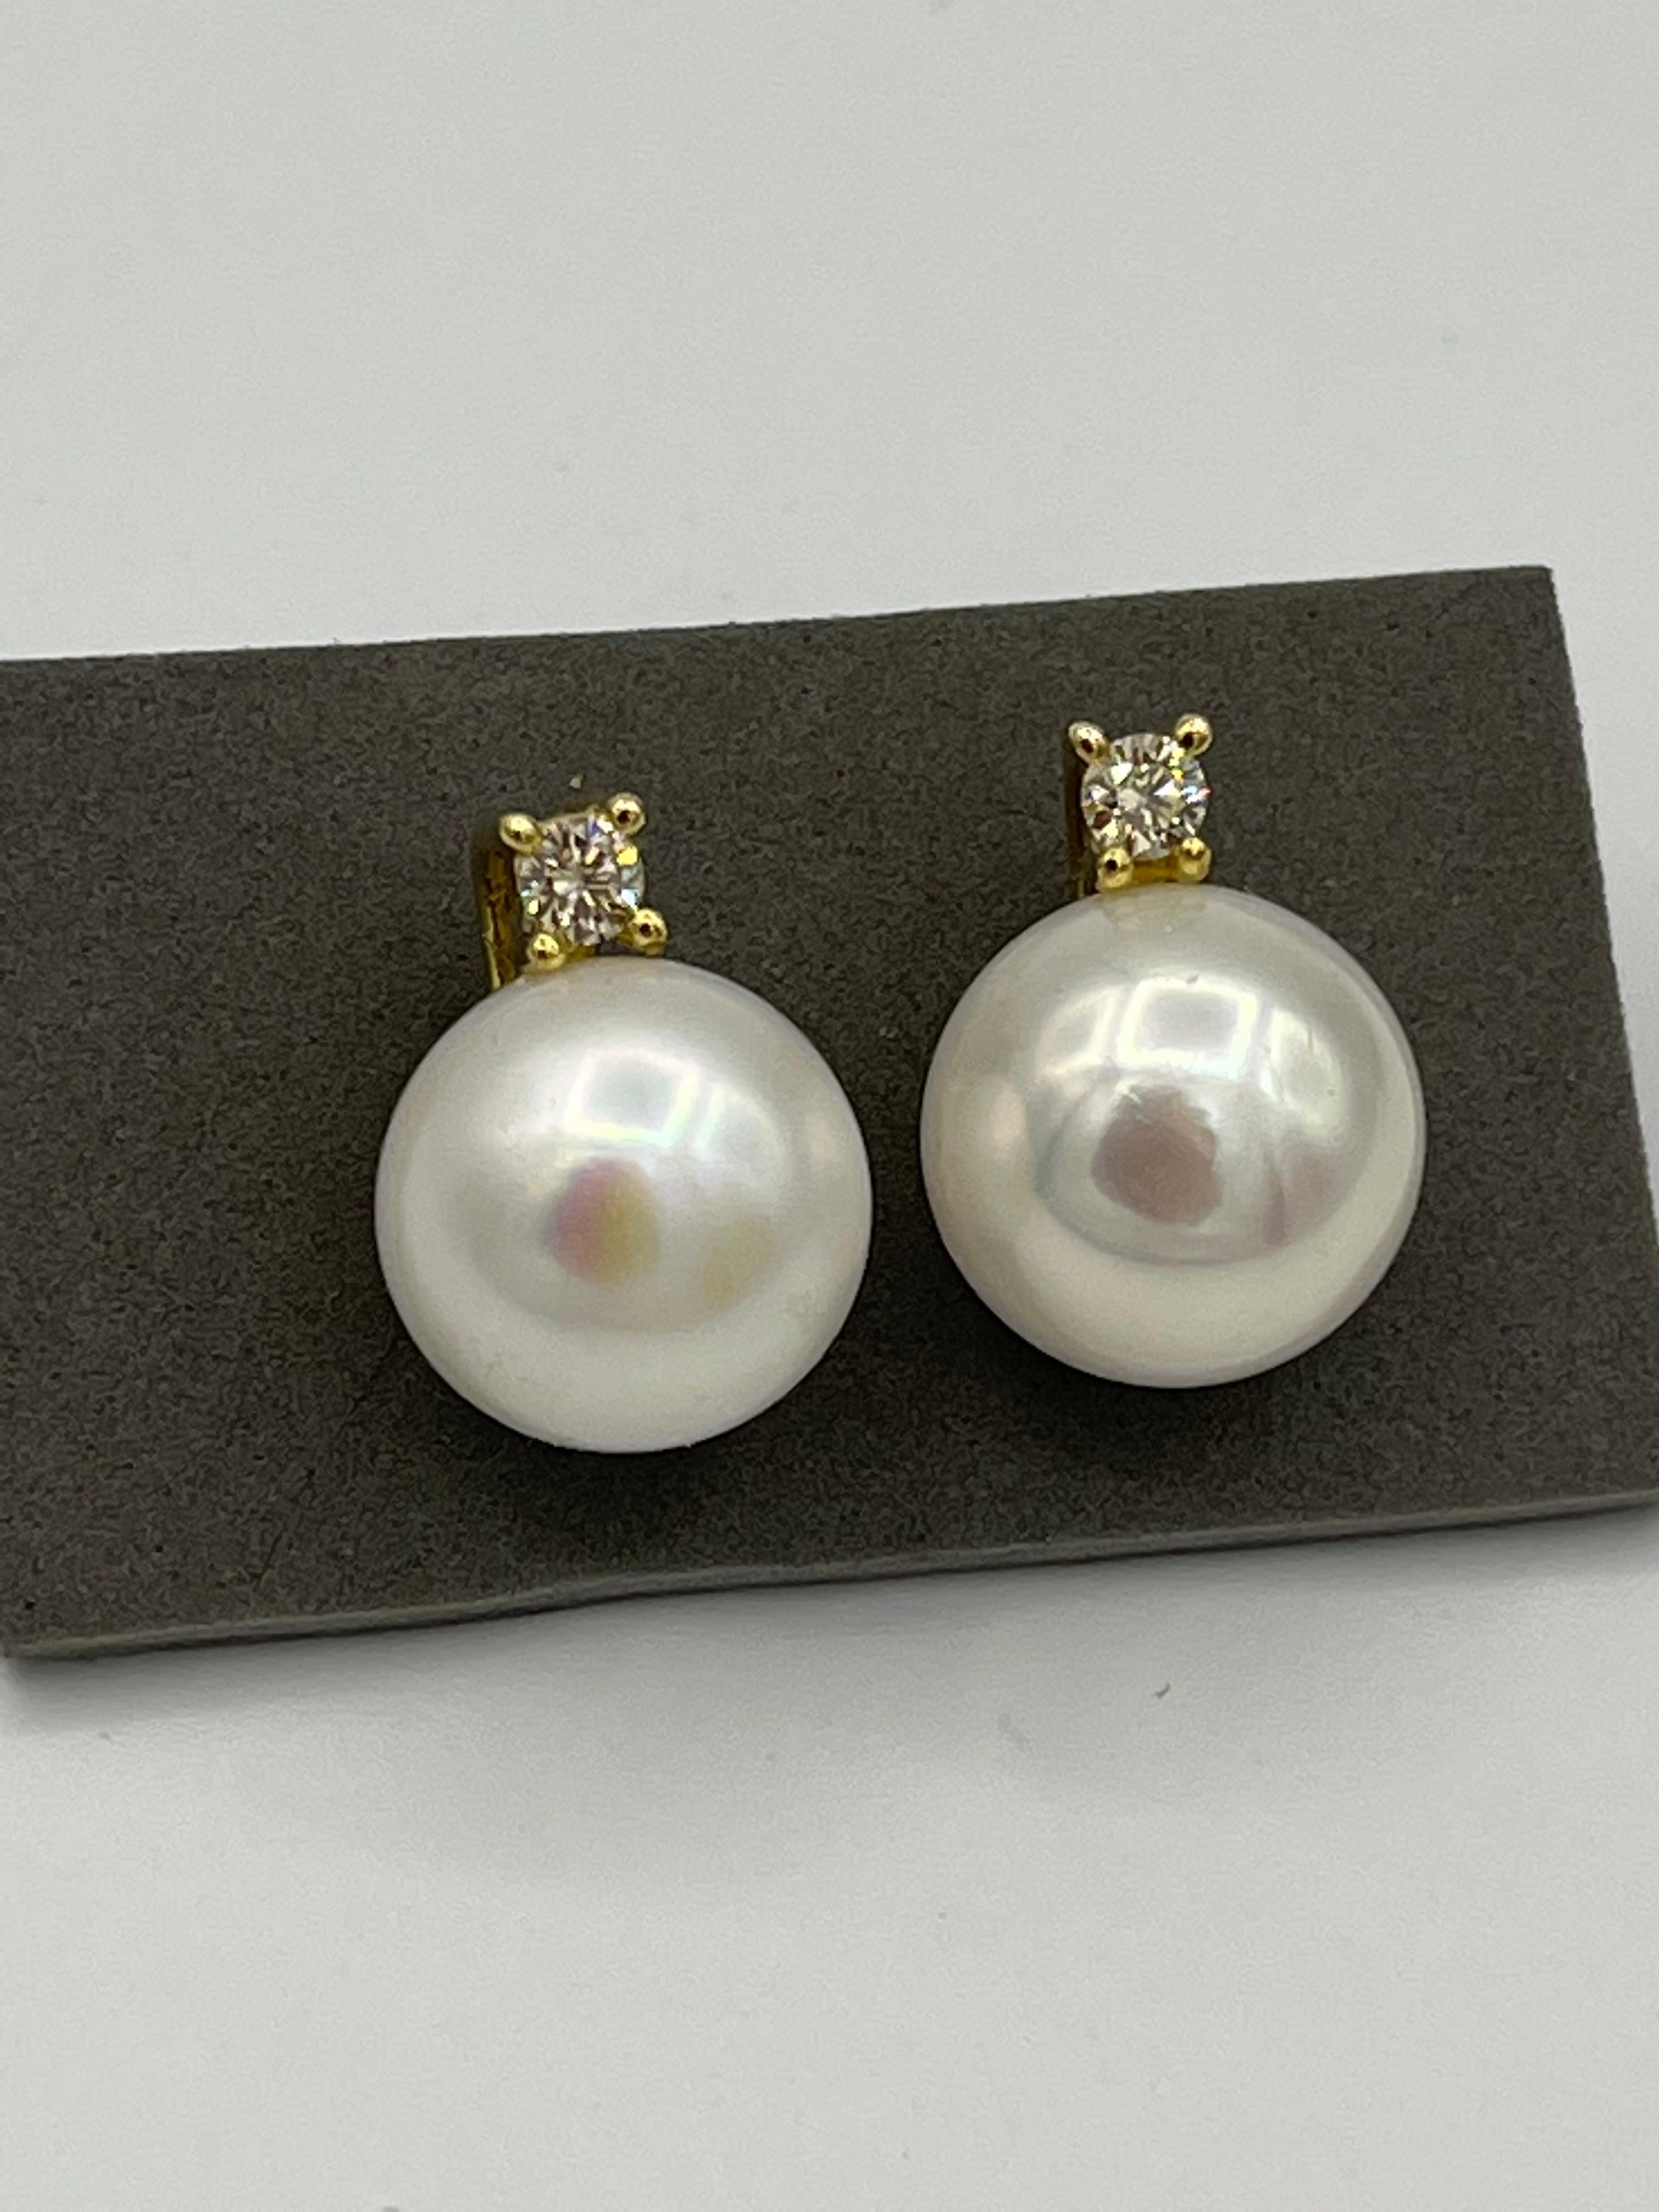 18 k yellow gold
hallmarked 750
on top diamonds ca. 0,10 ct
southseapearls ca. 11-12 mm
lenght ca. 15 mm
weight 9,48 gram

